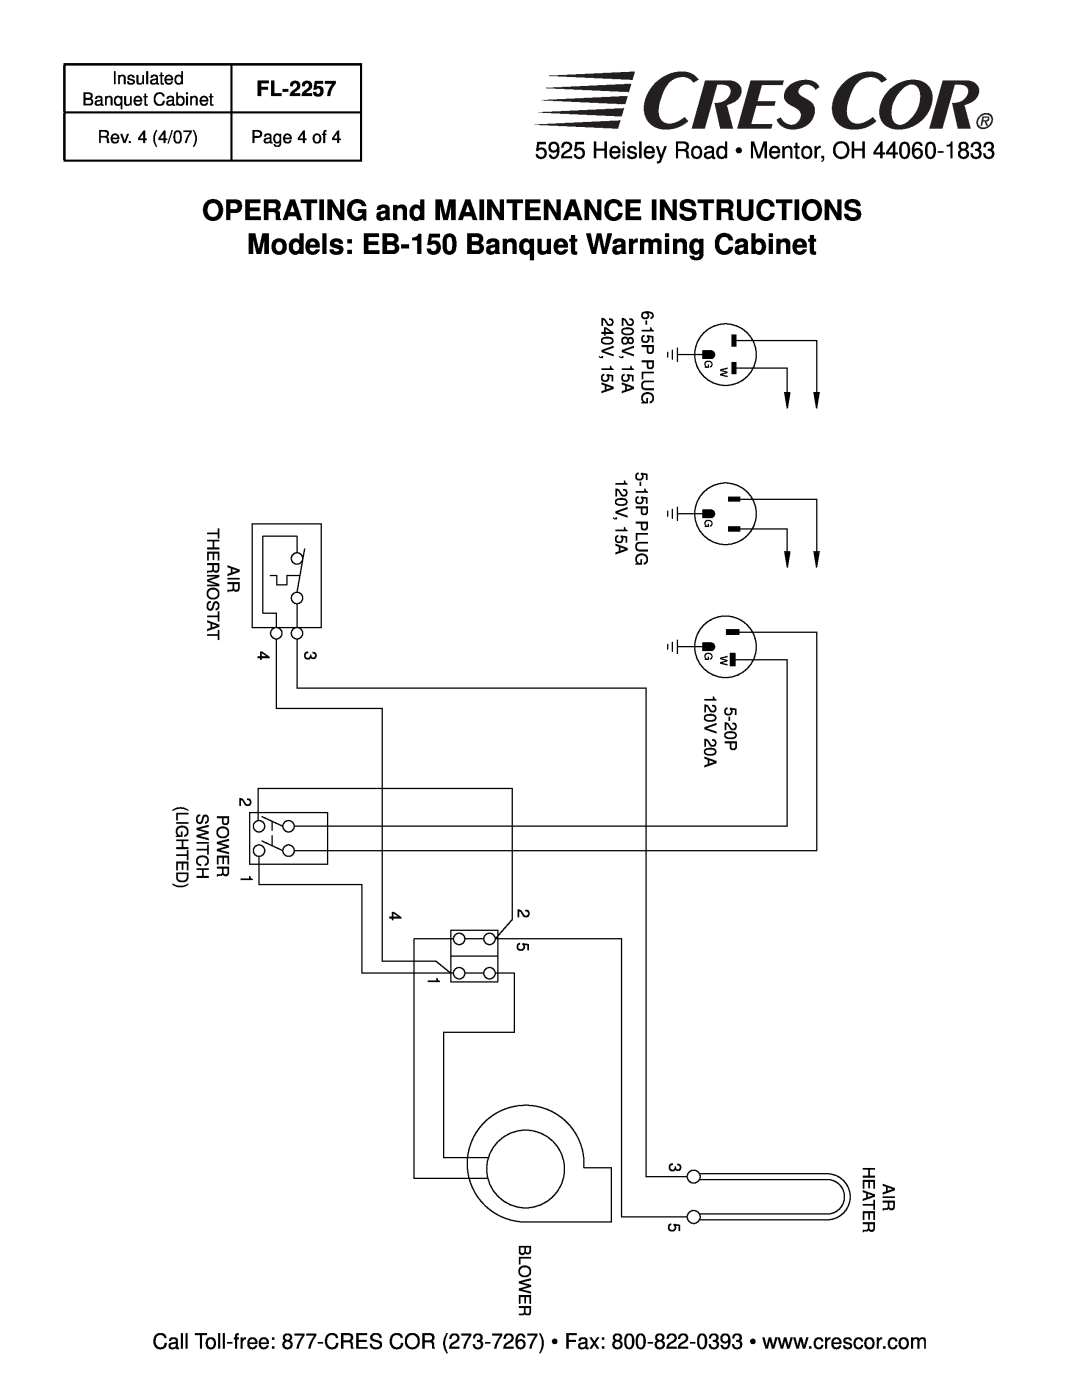 Cres Cor OPERATING and MAINTENANCE INSTRUCTIONS, Models EB-150Banquet Warming Cabinet, Heisley Road Mentor, OH 